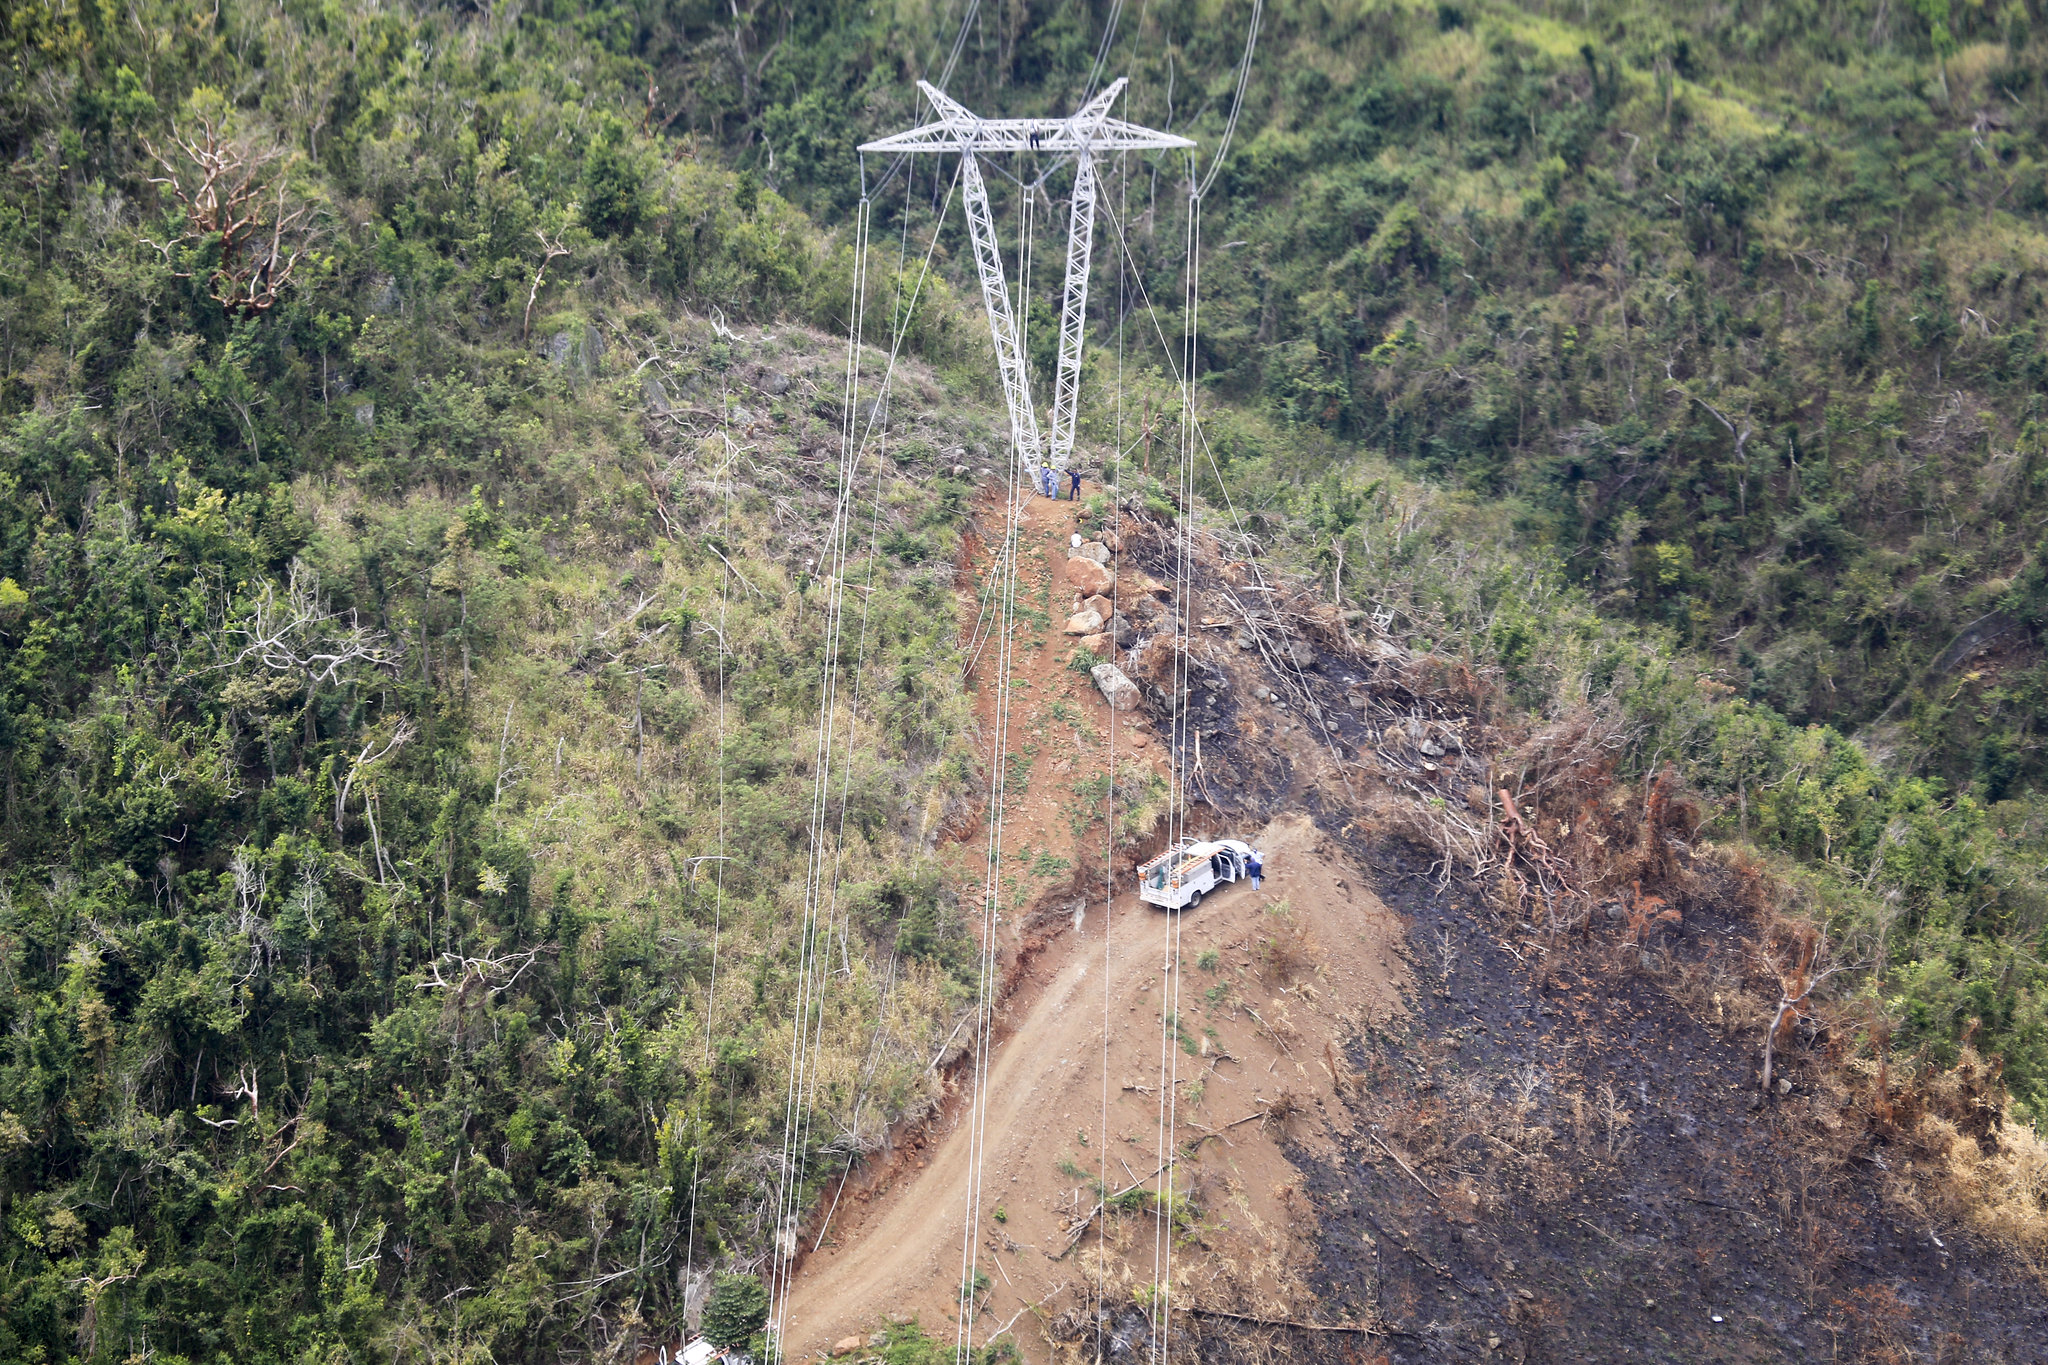 Transmission tower in the Montaña Area, Caguas, Puerto Rico. The power grid remains in fragile condition and much of the infrastructure is in hard-to-reach areas. (South Atlantic Division, US Army Corps of Engineers)